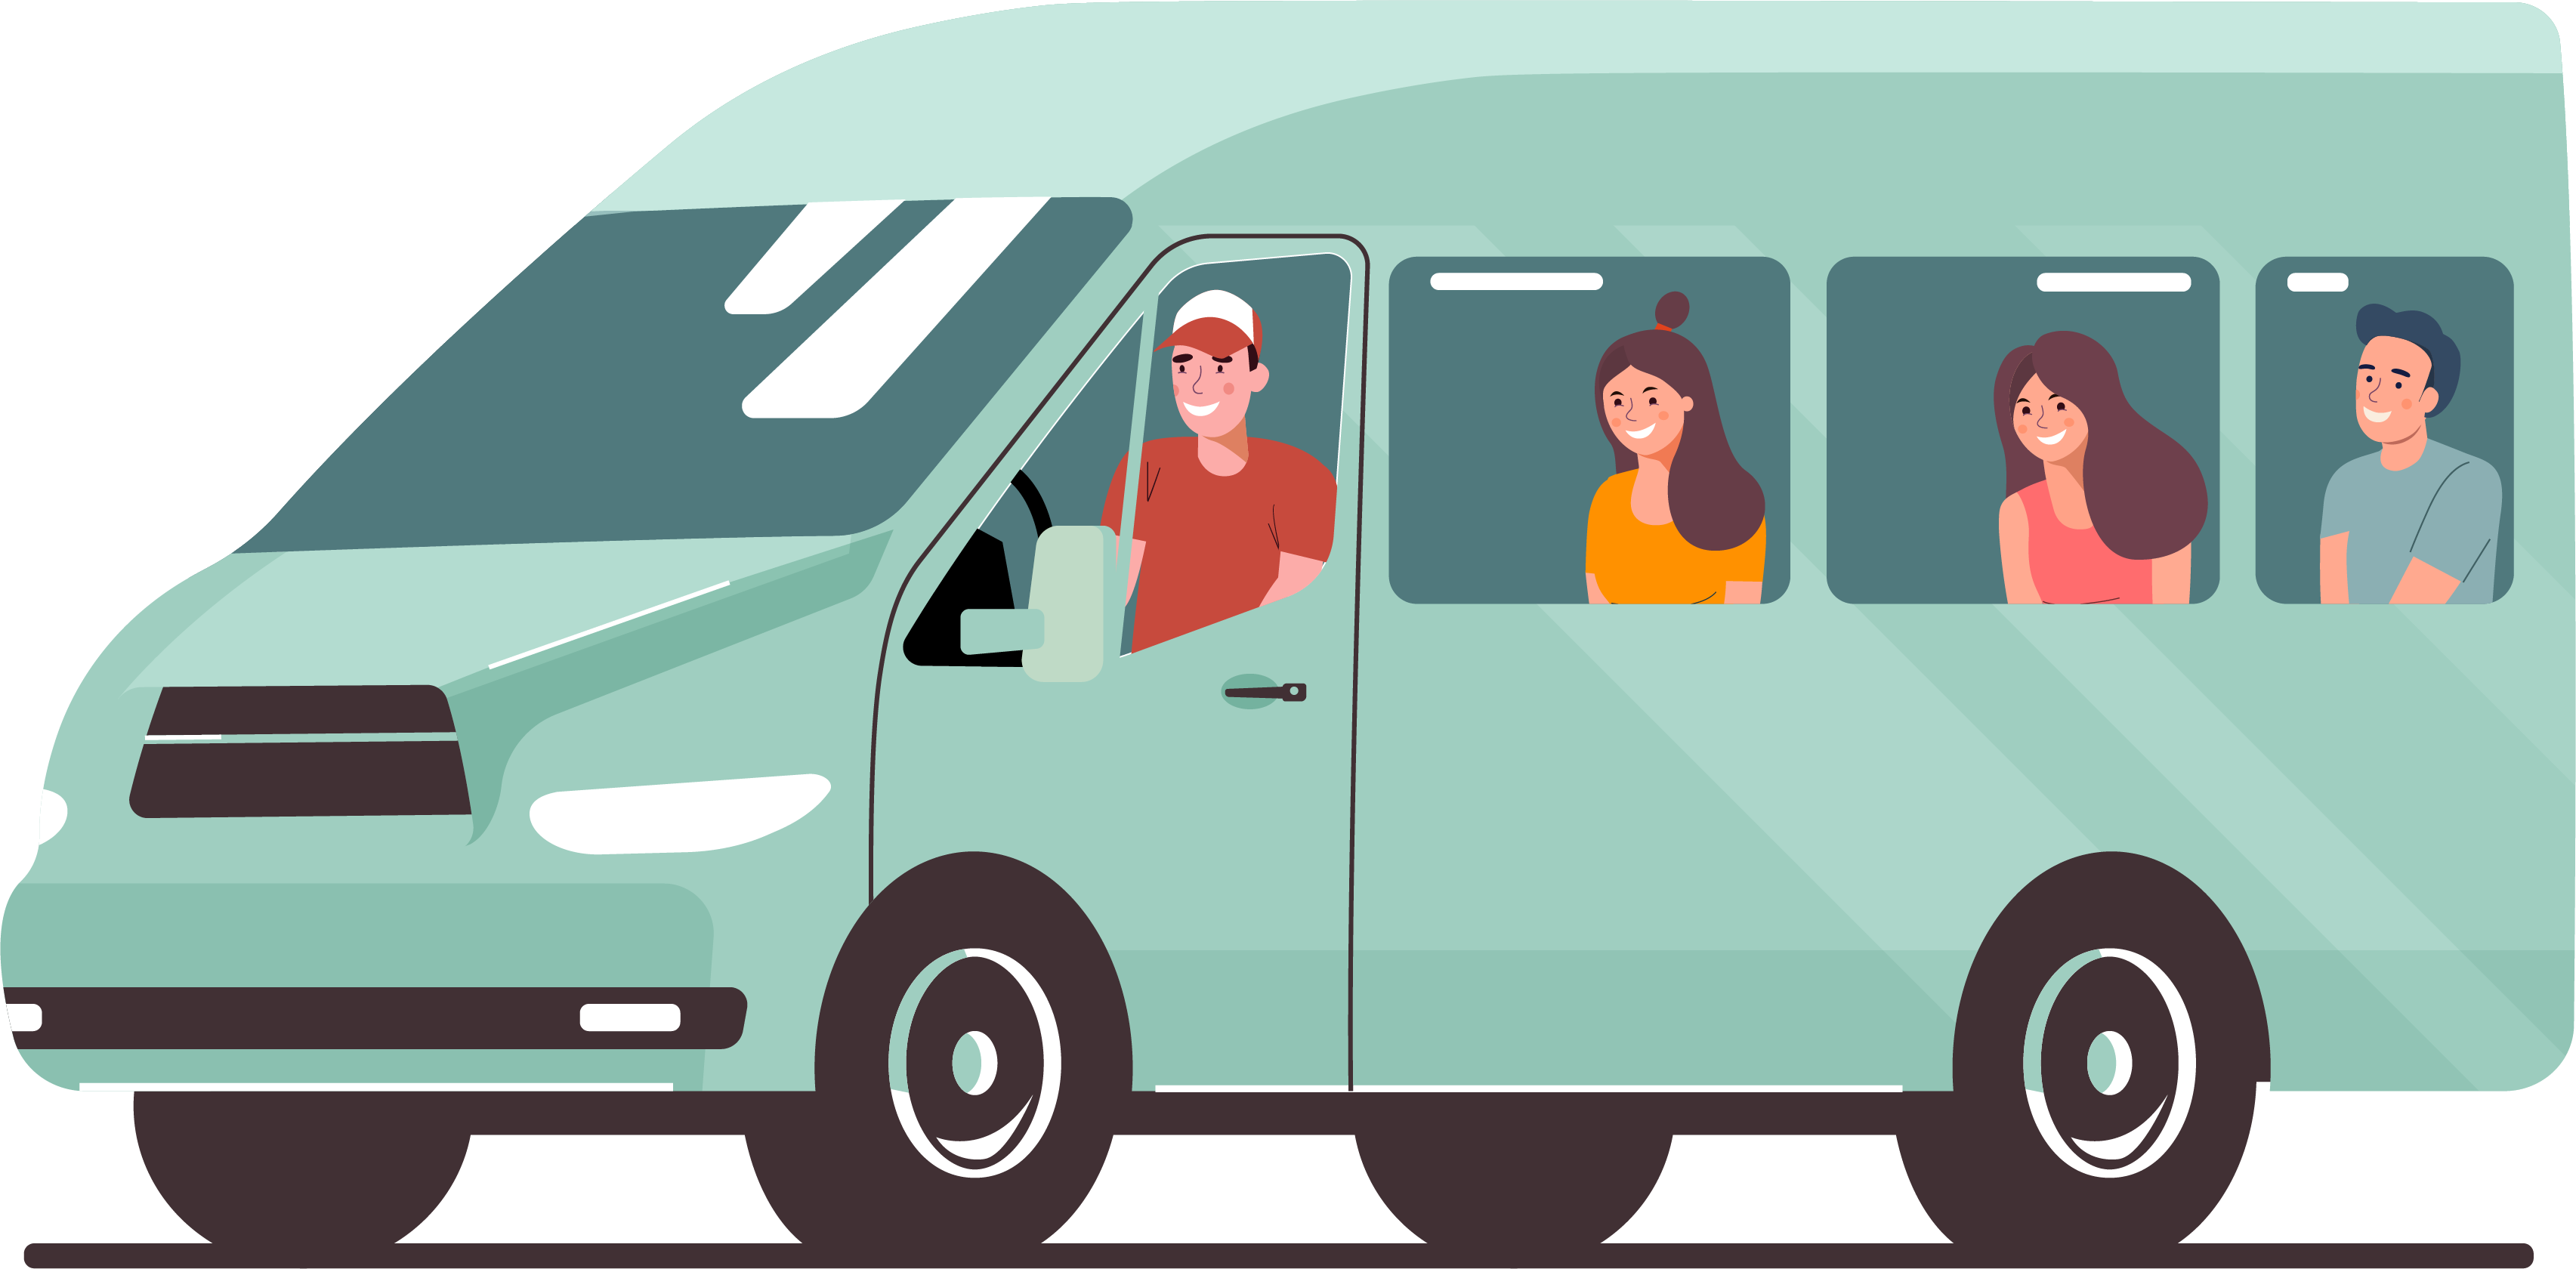 Green illustrated van with smiling passengers